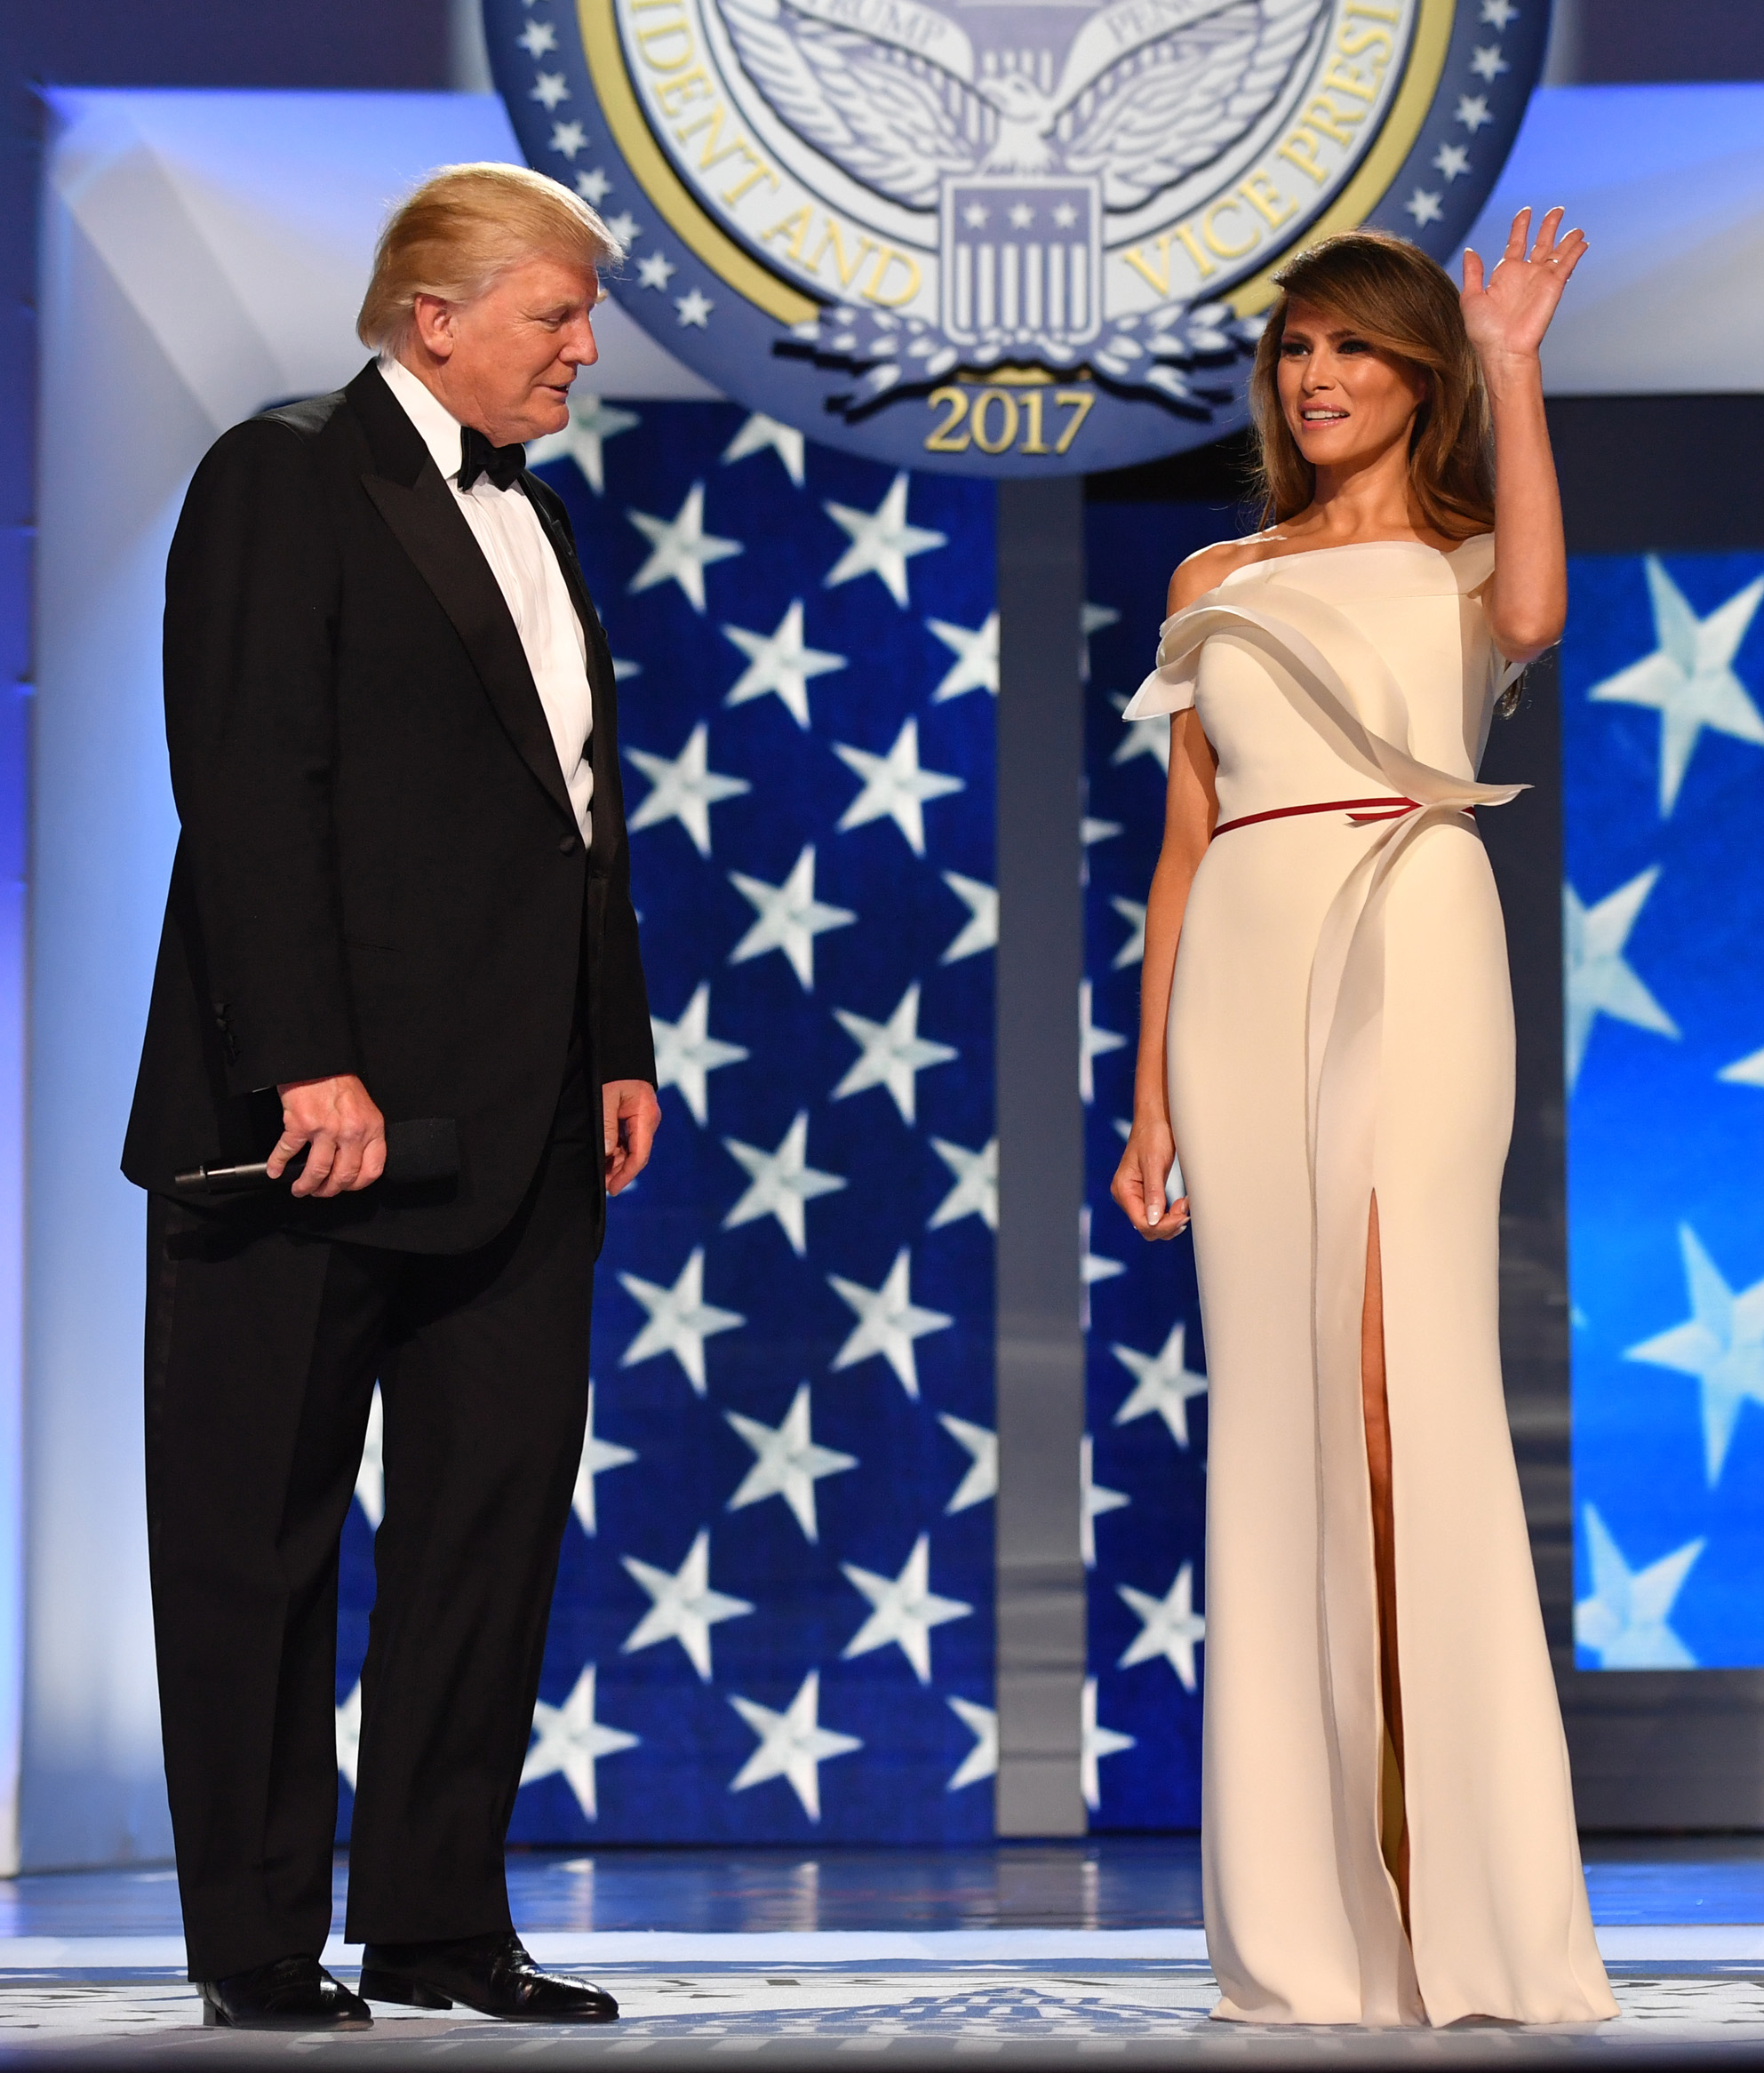 See how Melania Trump transformed from model to first lady